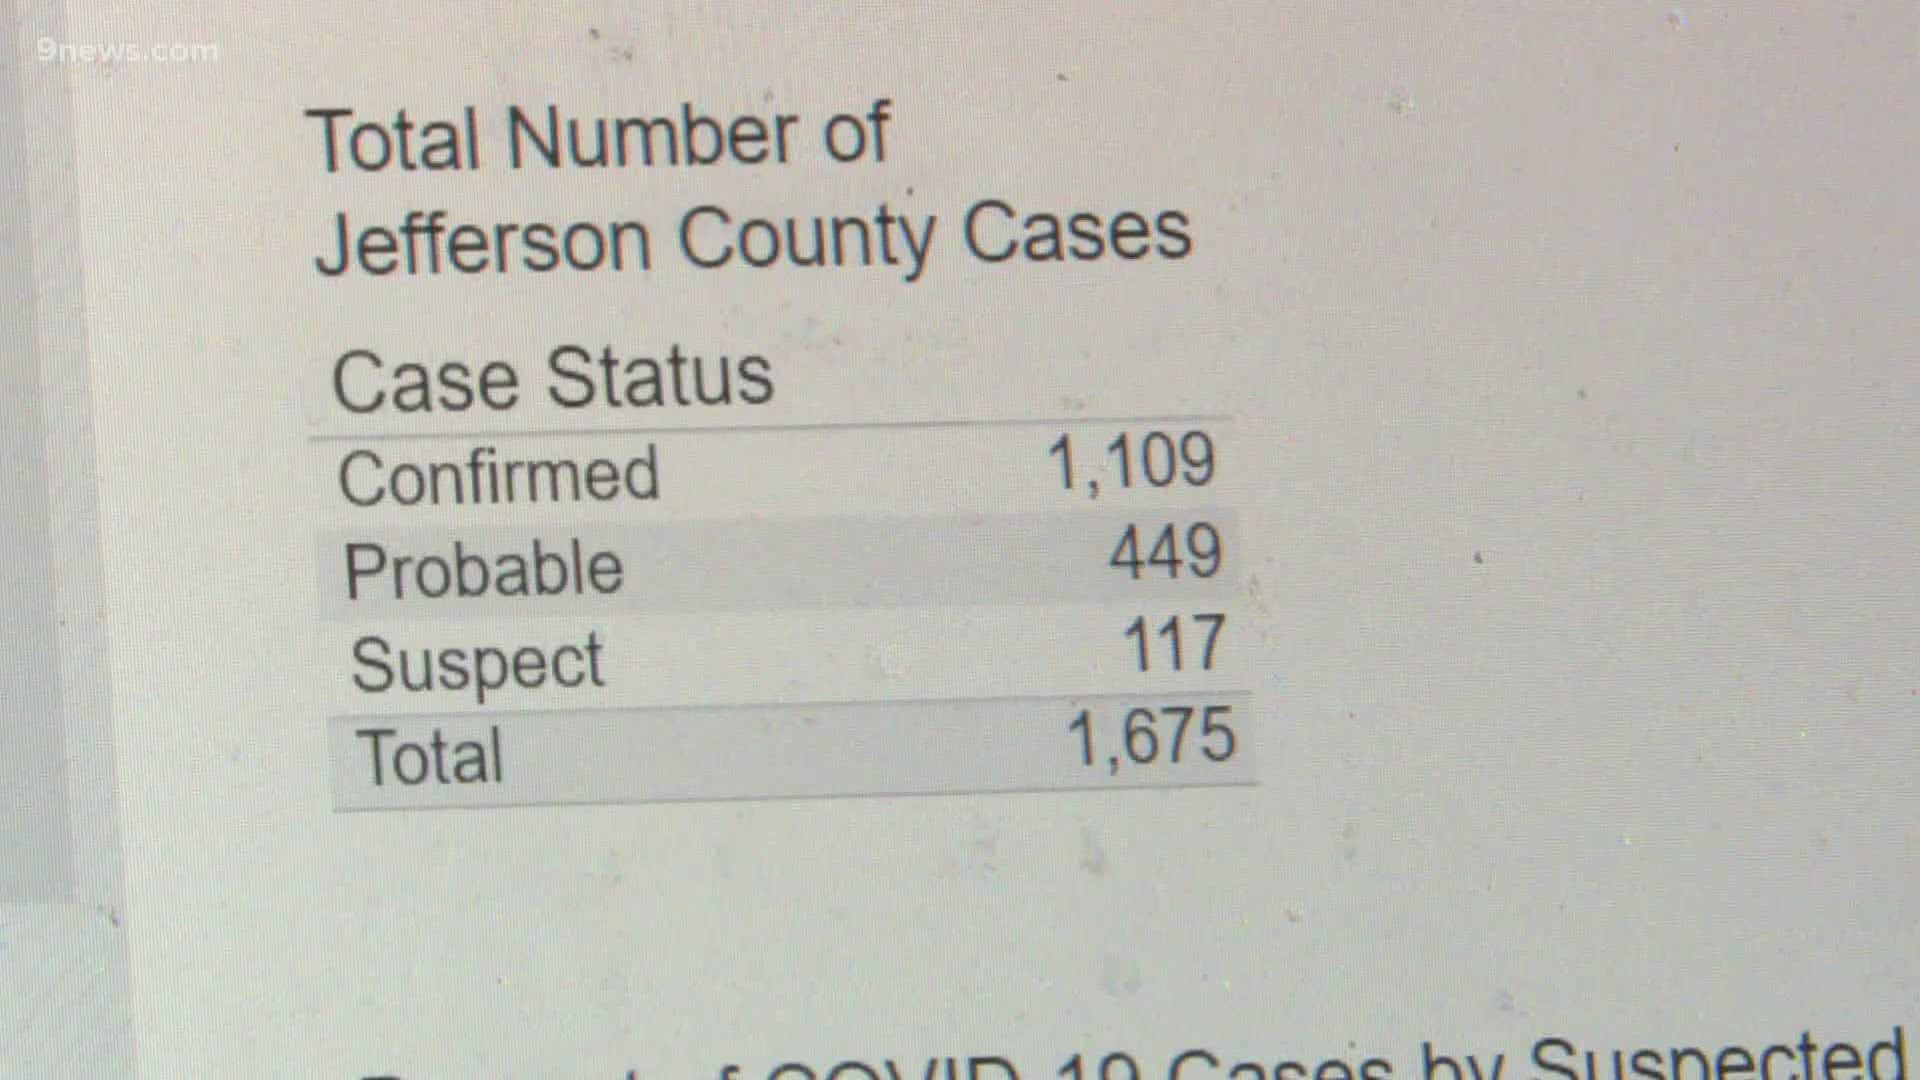 There won't be a decrease in cases anytime soon, but the county is increasing tested. And that will help officials reopen.